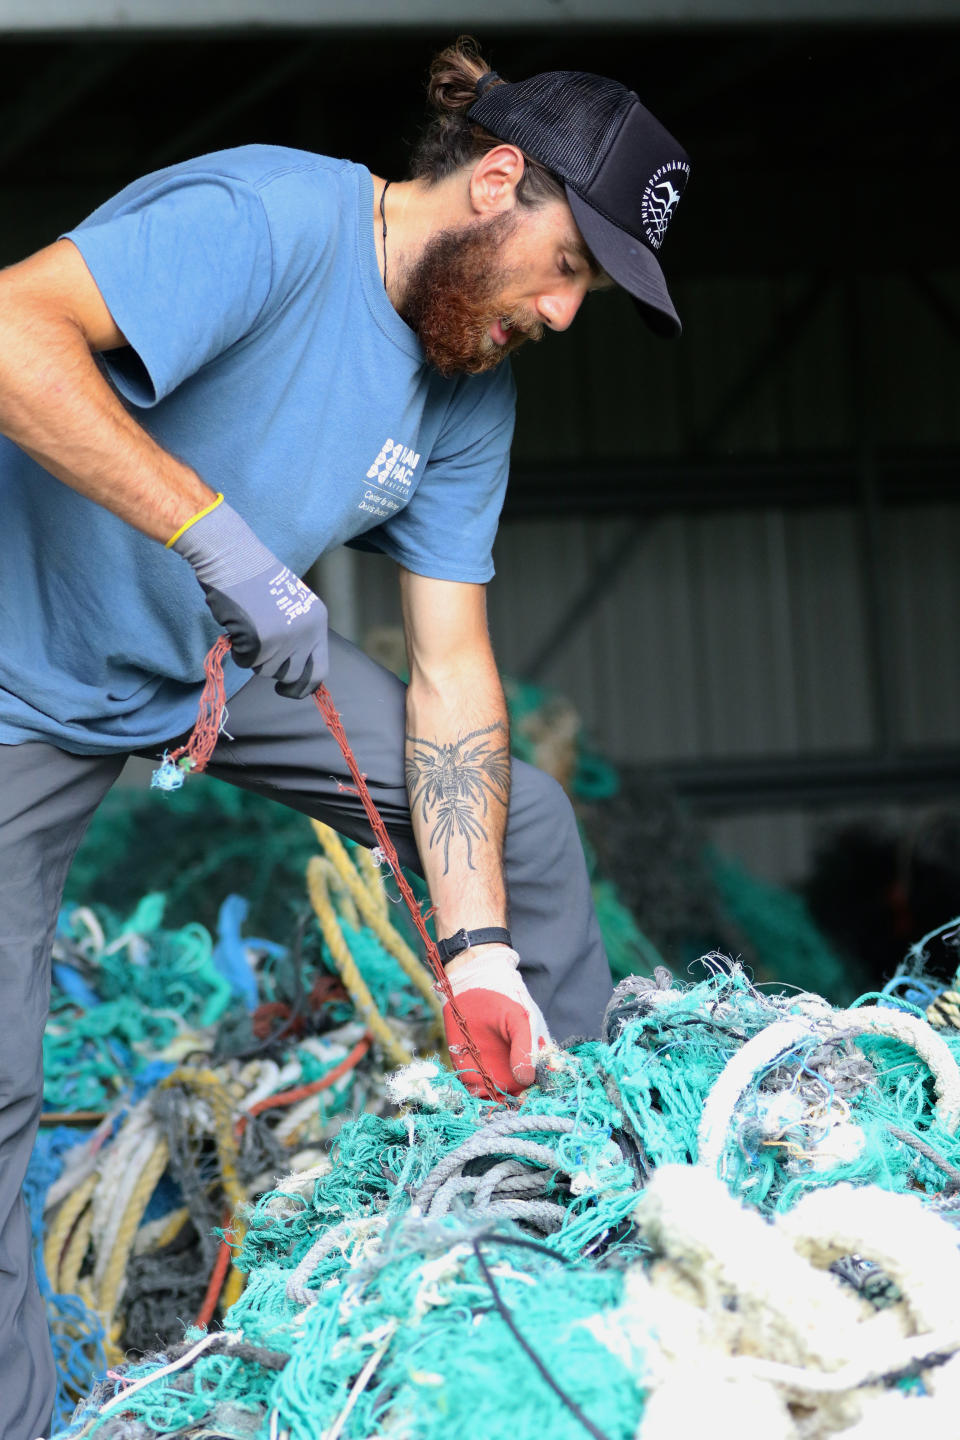 Drew McWhirter, a graduate student at Hawaii Pacific University's Center for Marine Debris Research, pulls apart a massive entanglement of ghost nets on Wednesday, May 12, 2021 in Kaneohe, Hawaii. Researchers are conducting a study that is attempting to trace derelict fishing gear that washes ashore in Hawaii back to the manufacturers and fisheries that it came from. (AP Photo/Caleb Jones)